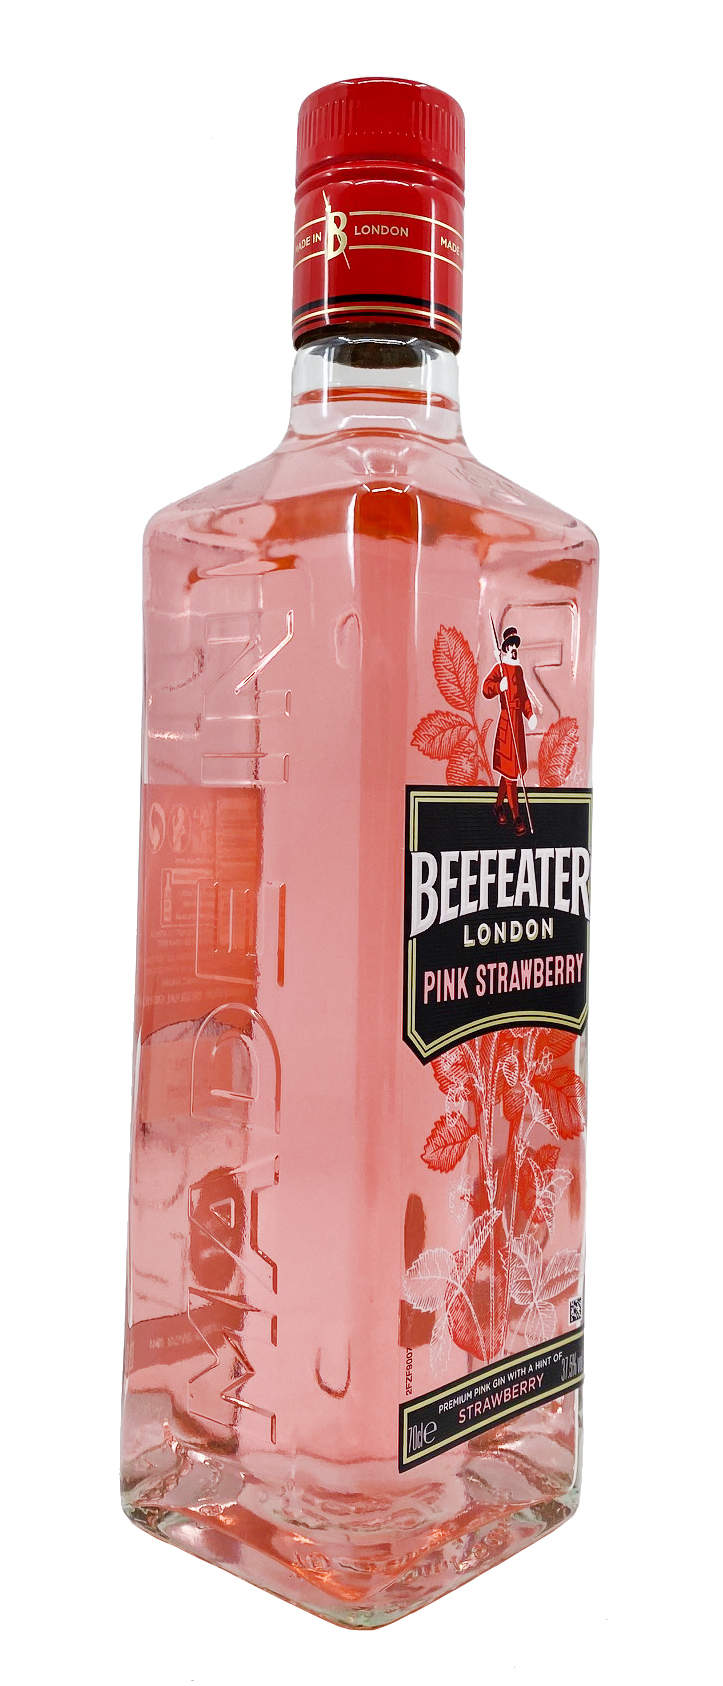 Beefeater London Pink Strawberry Gin 0,7l 37,5%vol.